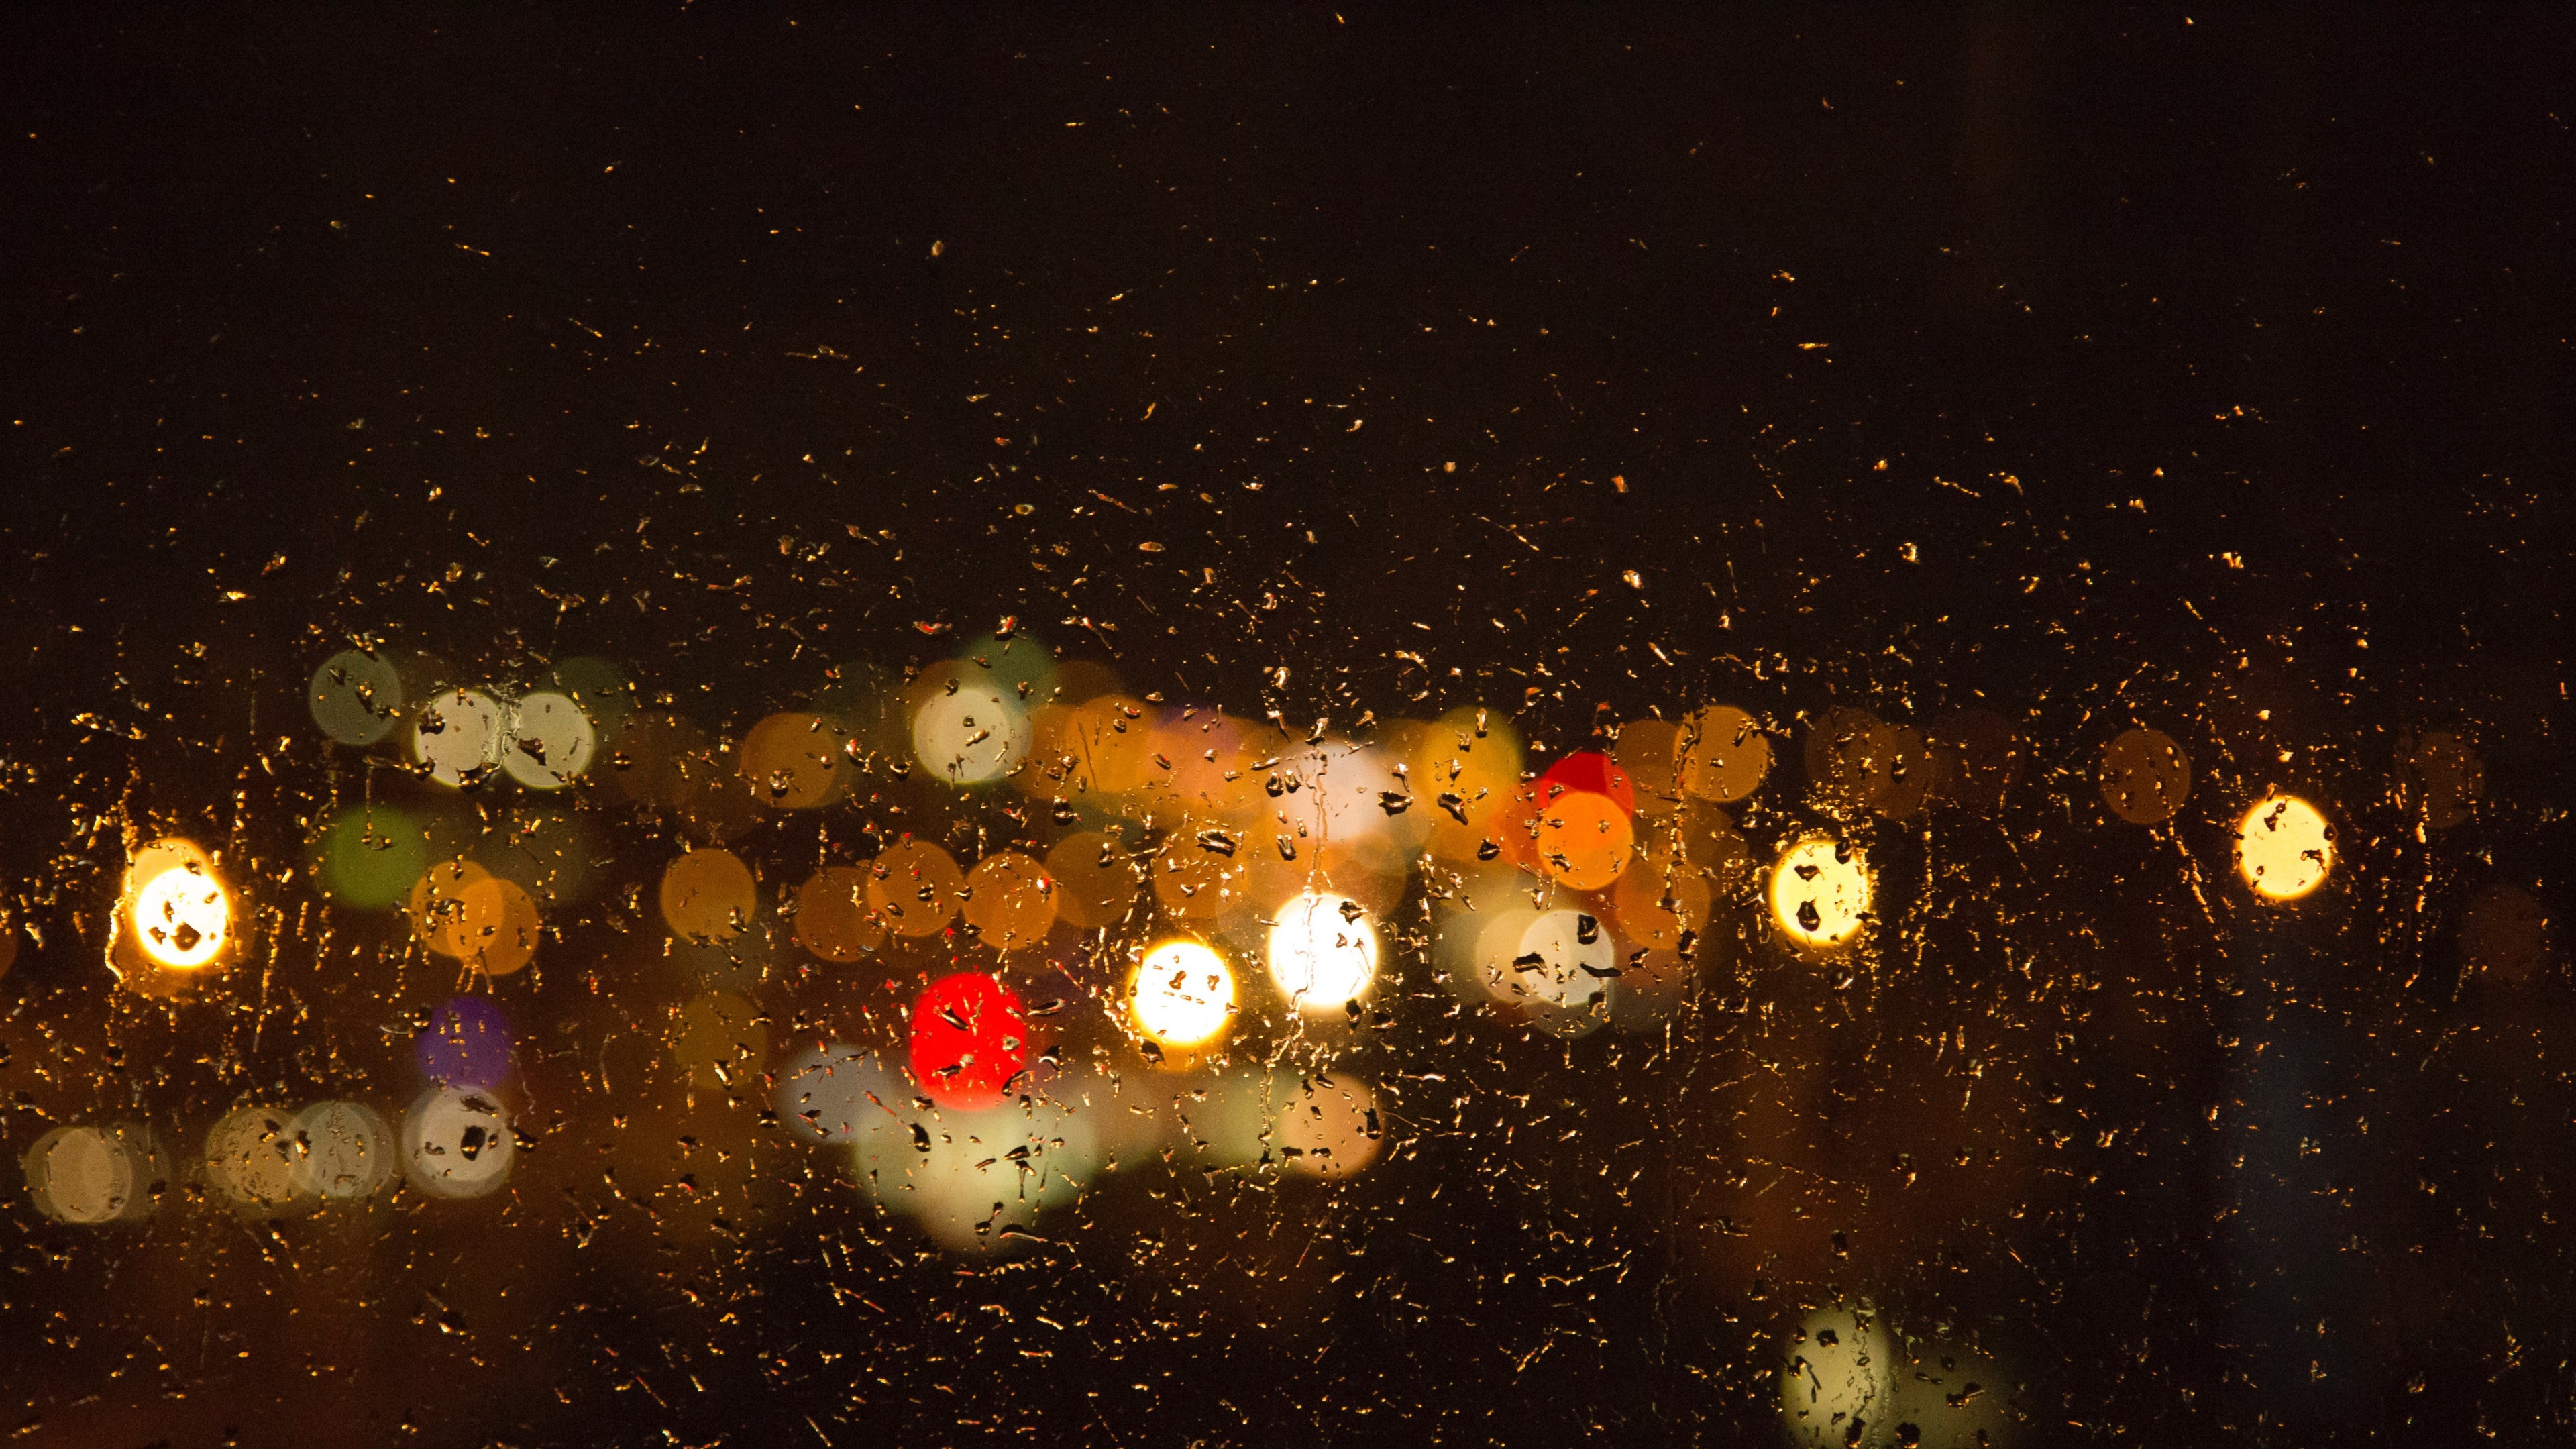 Wallpaper / a blurry view of traffic at night taken from behind a rain covered windshield, _night time rain driving 4k wallpaper free download